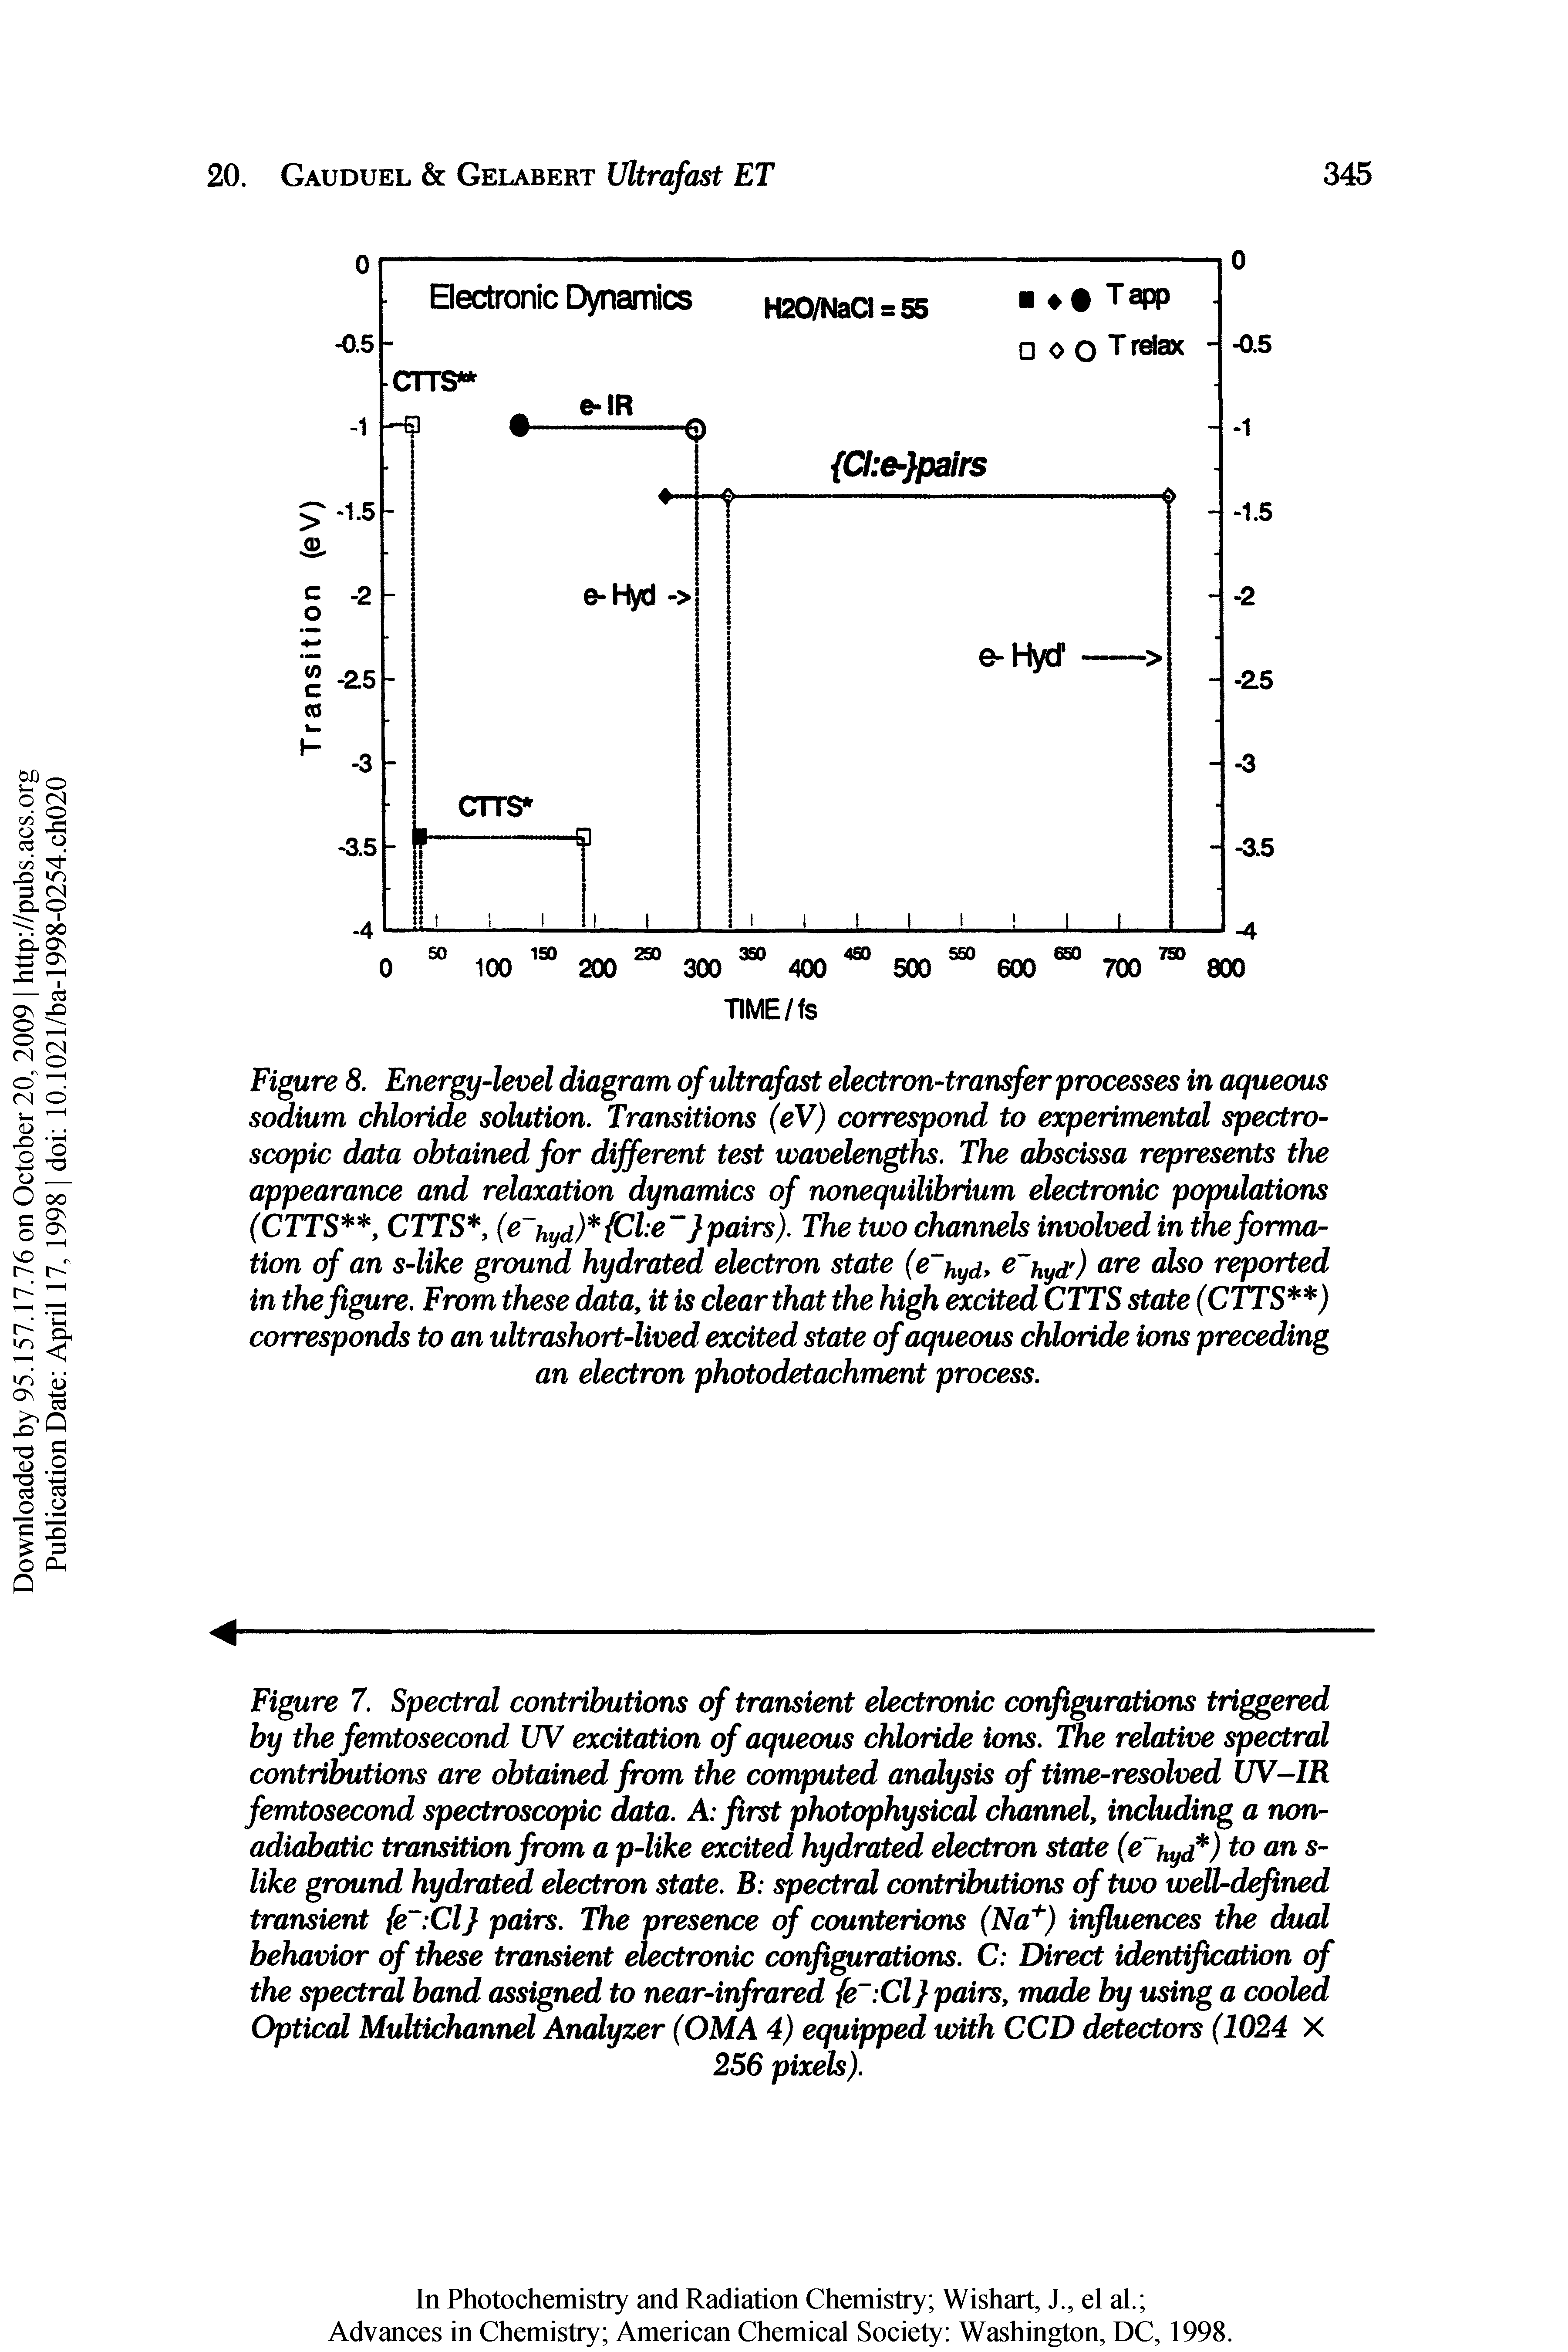 Figure 7. Spectral contributions of transient electronic configurations triggered by the femtosecond UV excitation of aqueous chloride ions. The relative spectral contributions are obtained from the computed analysis of time-resolved UV-IR femtosecond spectroscopic data. A first photophysical channel, including a non-adiabatic transition from a p-like excited hydrated electron state (e hydV to an s-like ground hydrated electron state. B spectral contributions of two well-defined transient fe Cl pairs. The presence of counterions (Na ) influences the dual behavior of these transient electronic configurations. C Direct identification of the spectral band assigned to near-infrared fe Cl pairs, made by using a cooled Optical Multichannel Analyzer (OMA 4) equipped with CCD detectors (1024 X...